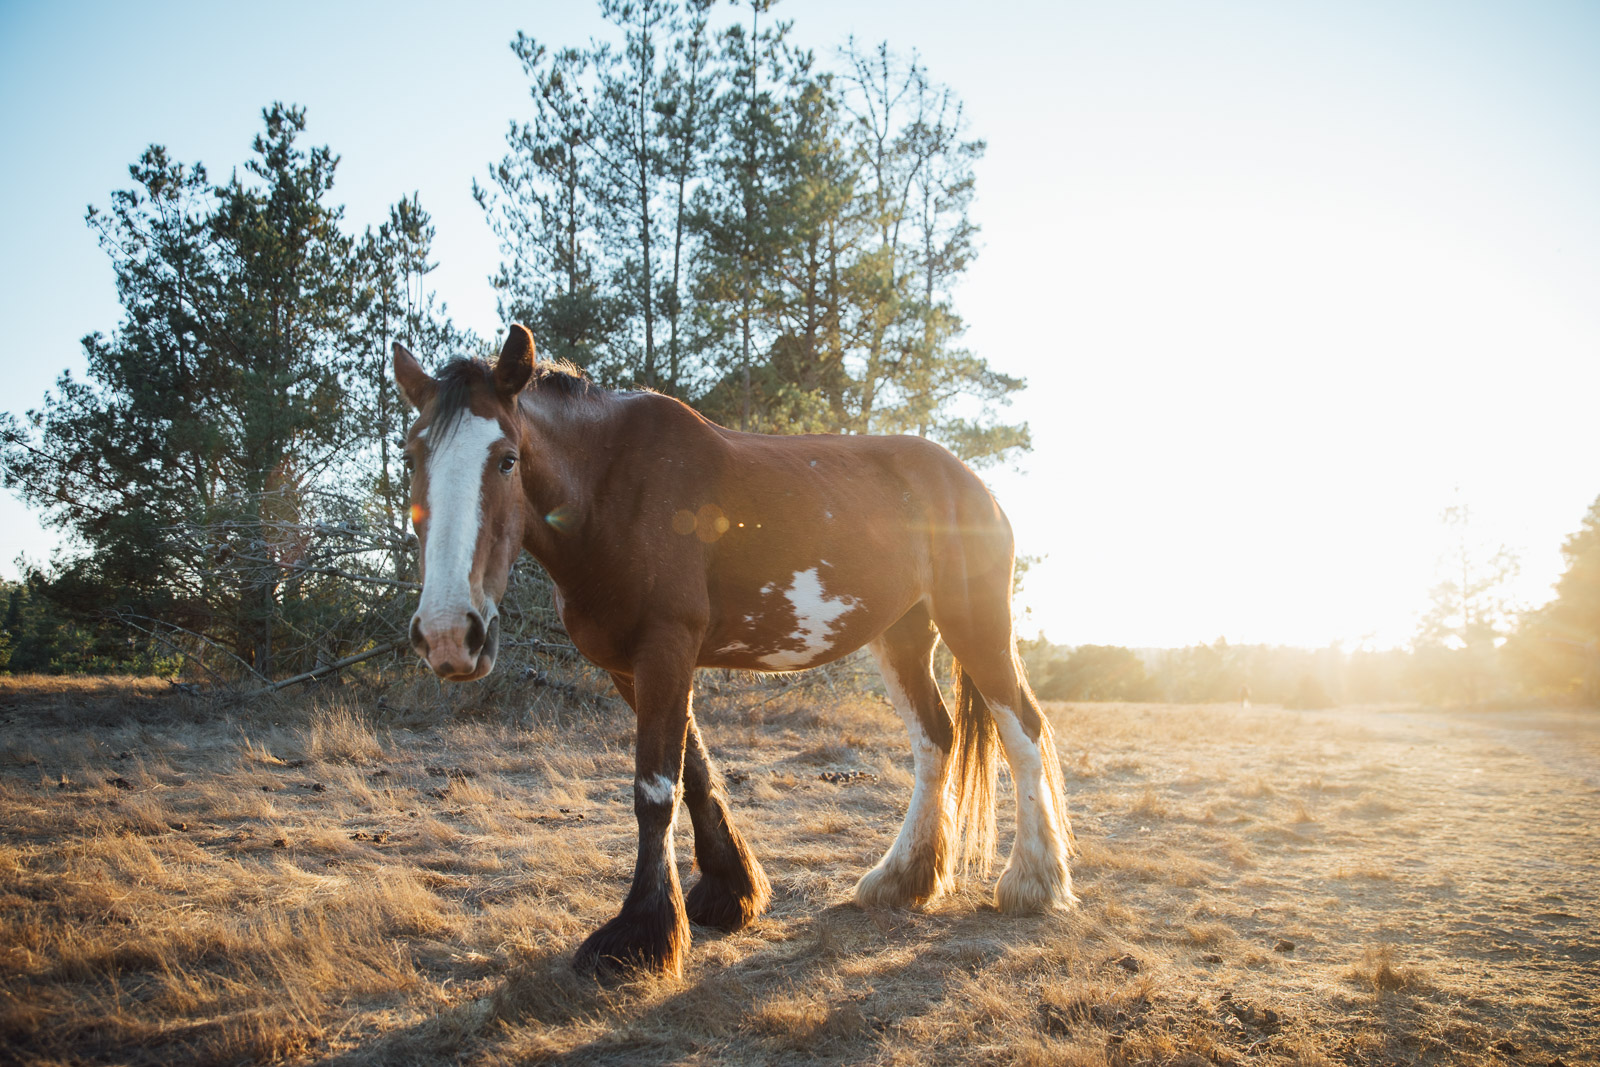 See the sights from atop a gentle giant at Covell's Clydesdale Ranch or Cambria Horseback.